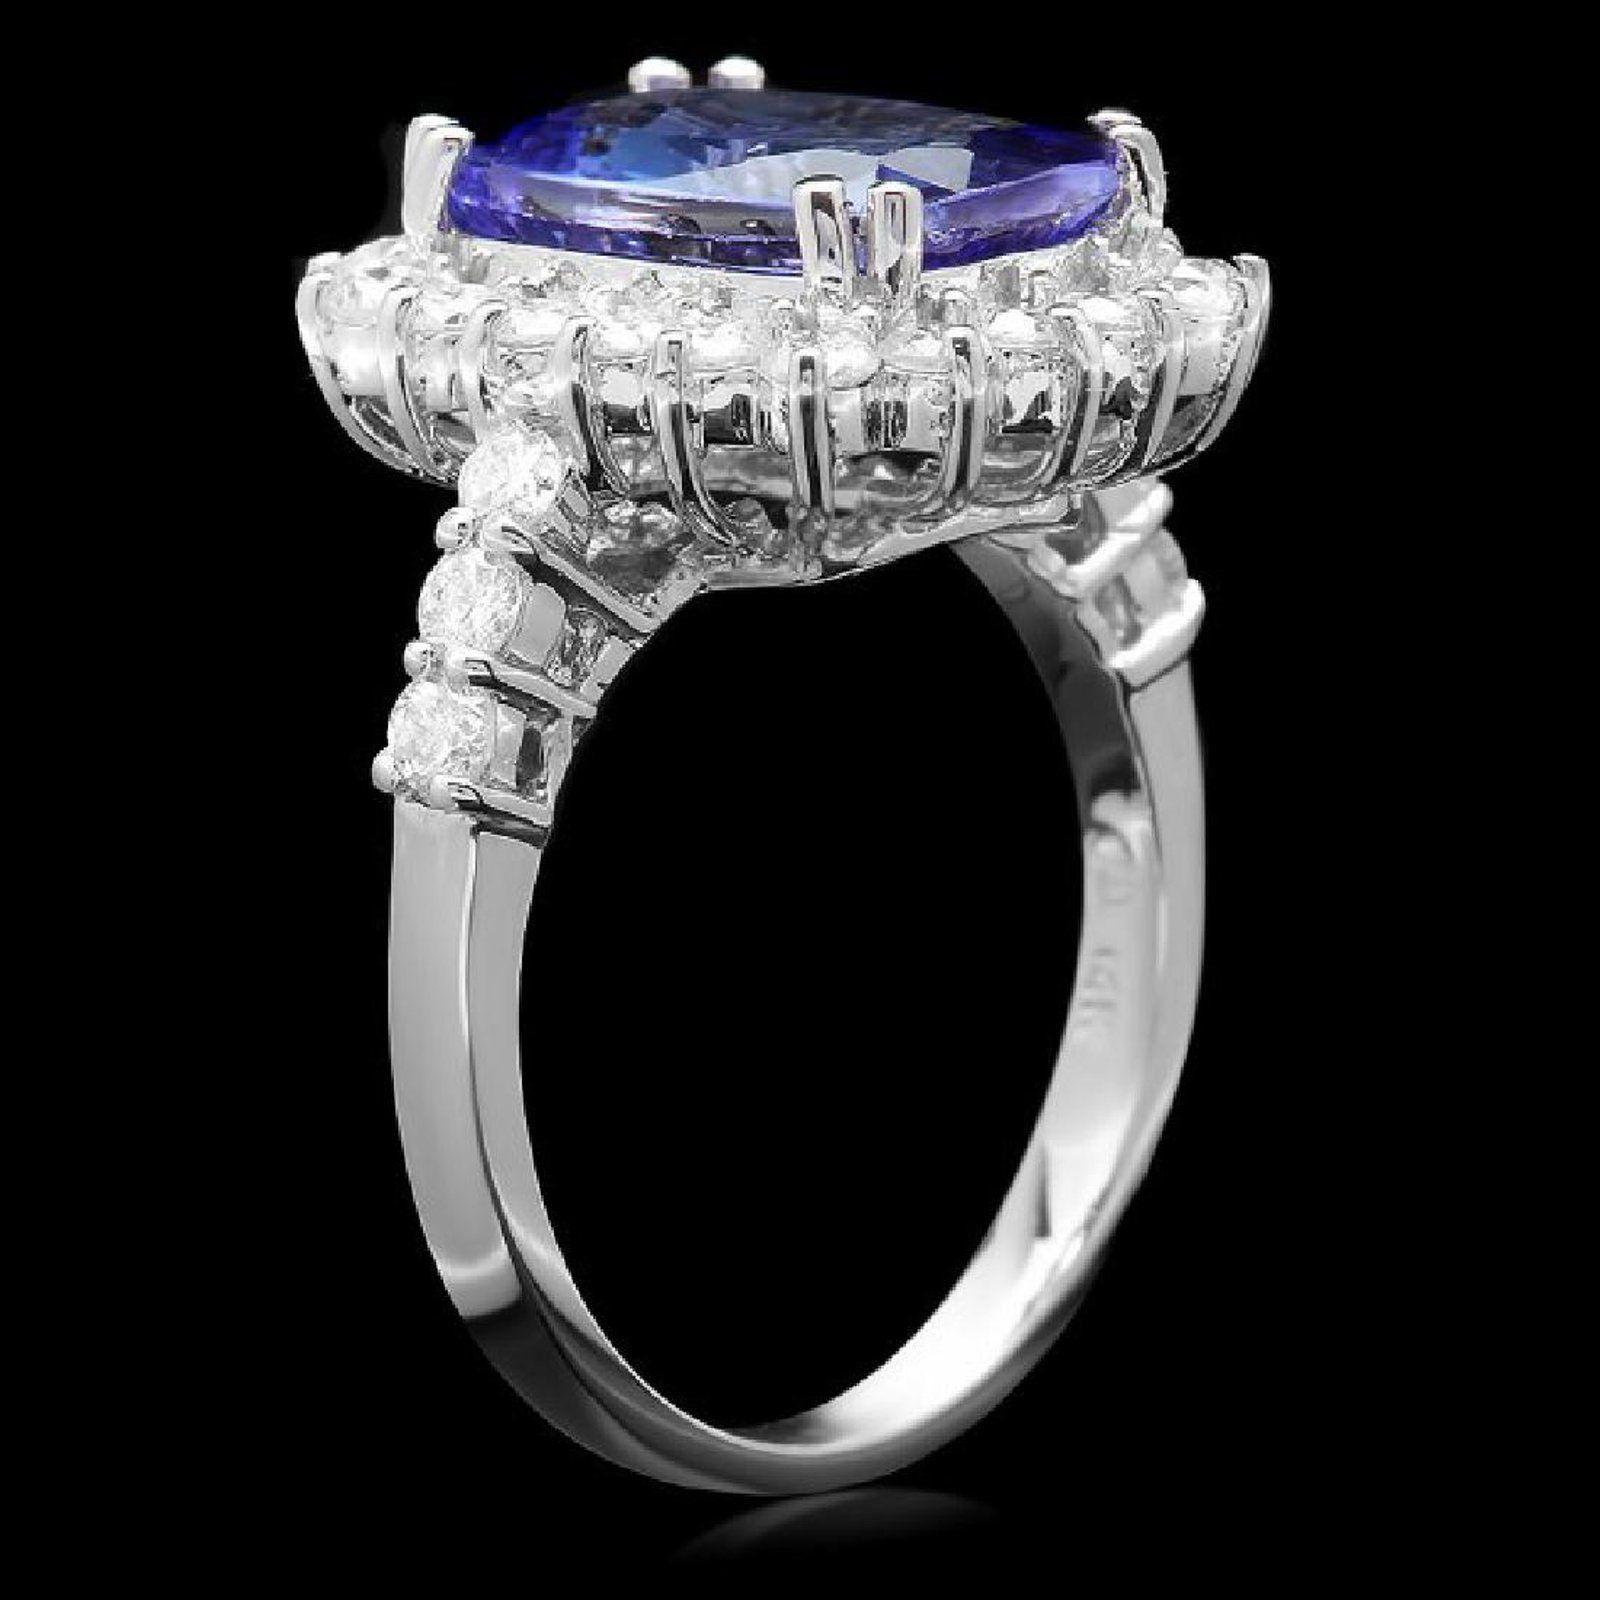 5.65 Carats Natural Very Nice Looking Tanzanite and Diamond 14K Solid White Gold Ring

Total Natural Cushion Cut Tanzanite Weight is: Approx. 4.50 Carats

Tanzanite Measures: Approx. 12.00 x 8.00mm

Natural Round Diamonds Weight: Approx. 1.15 Carats